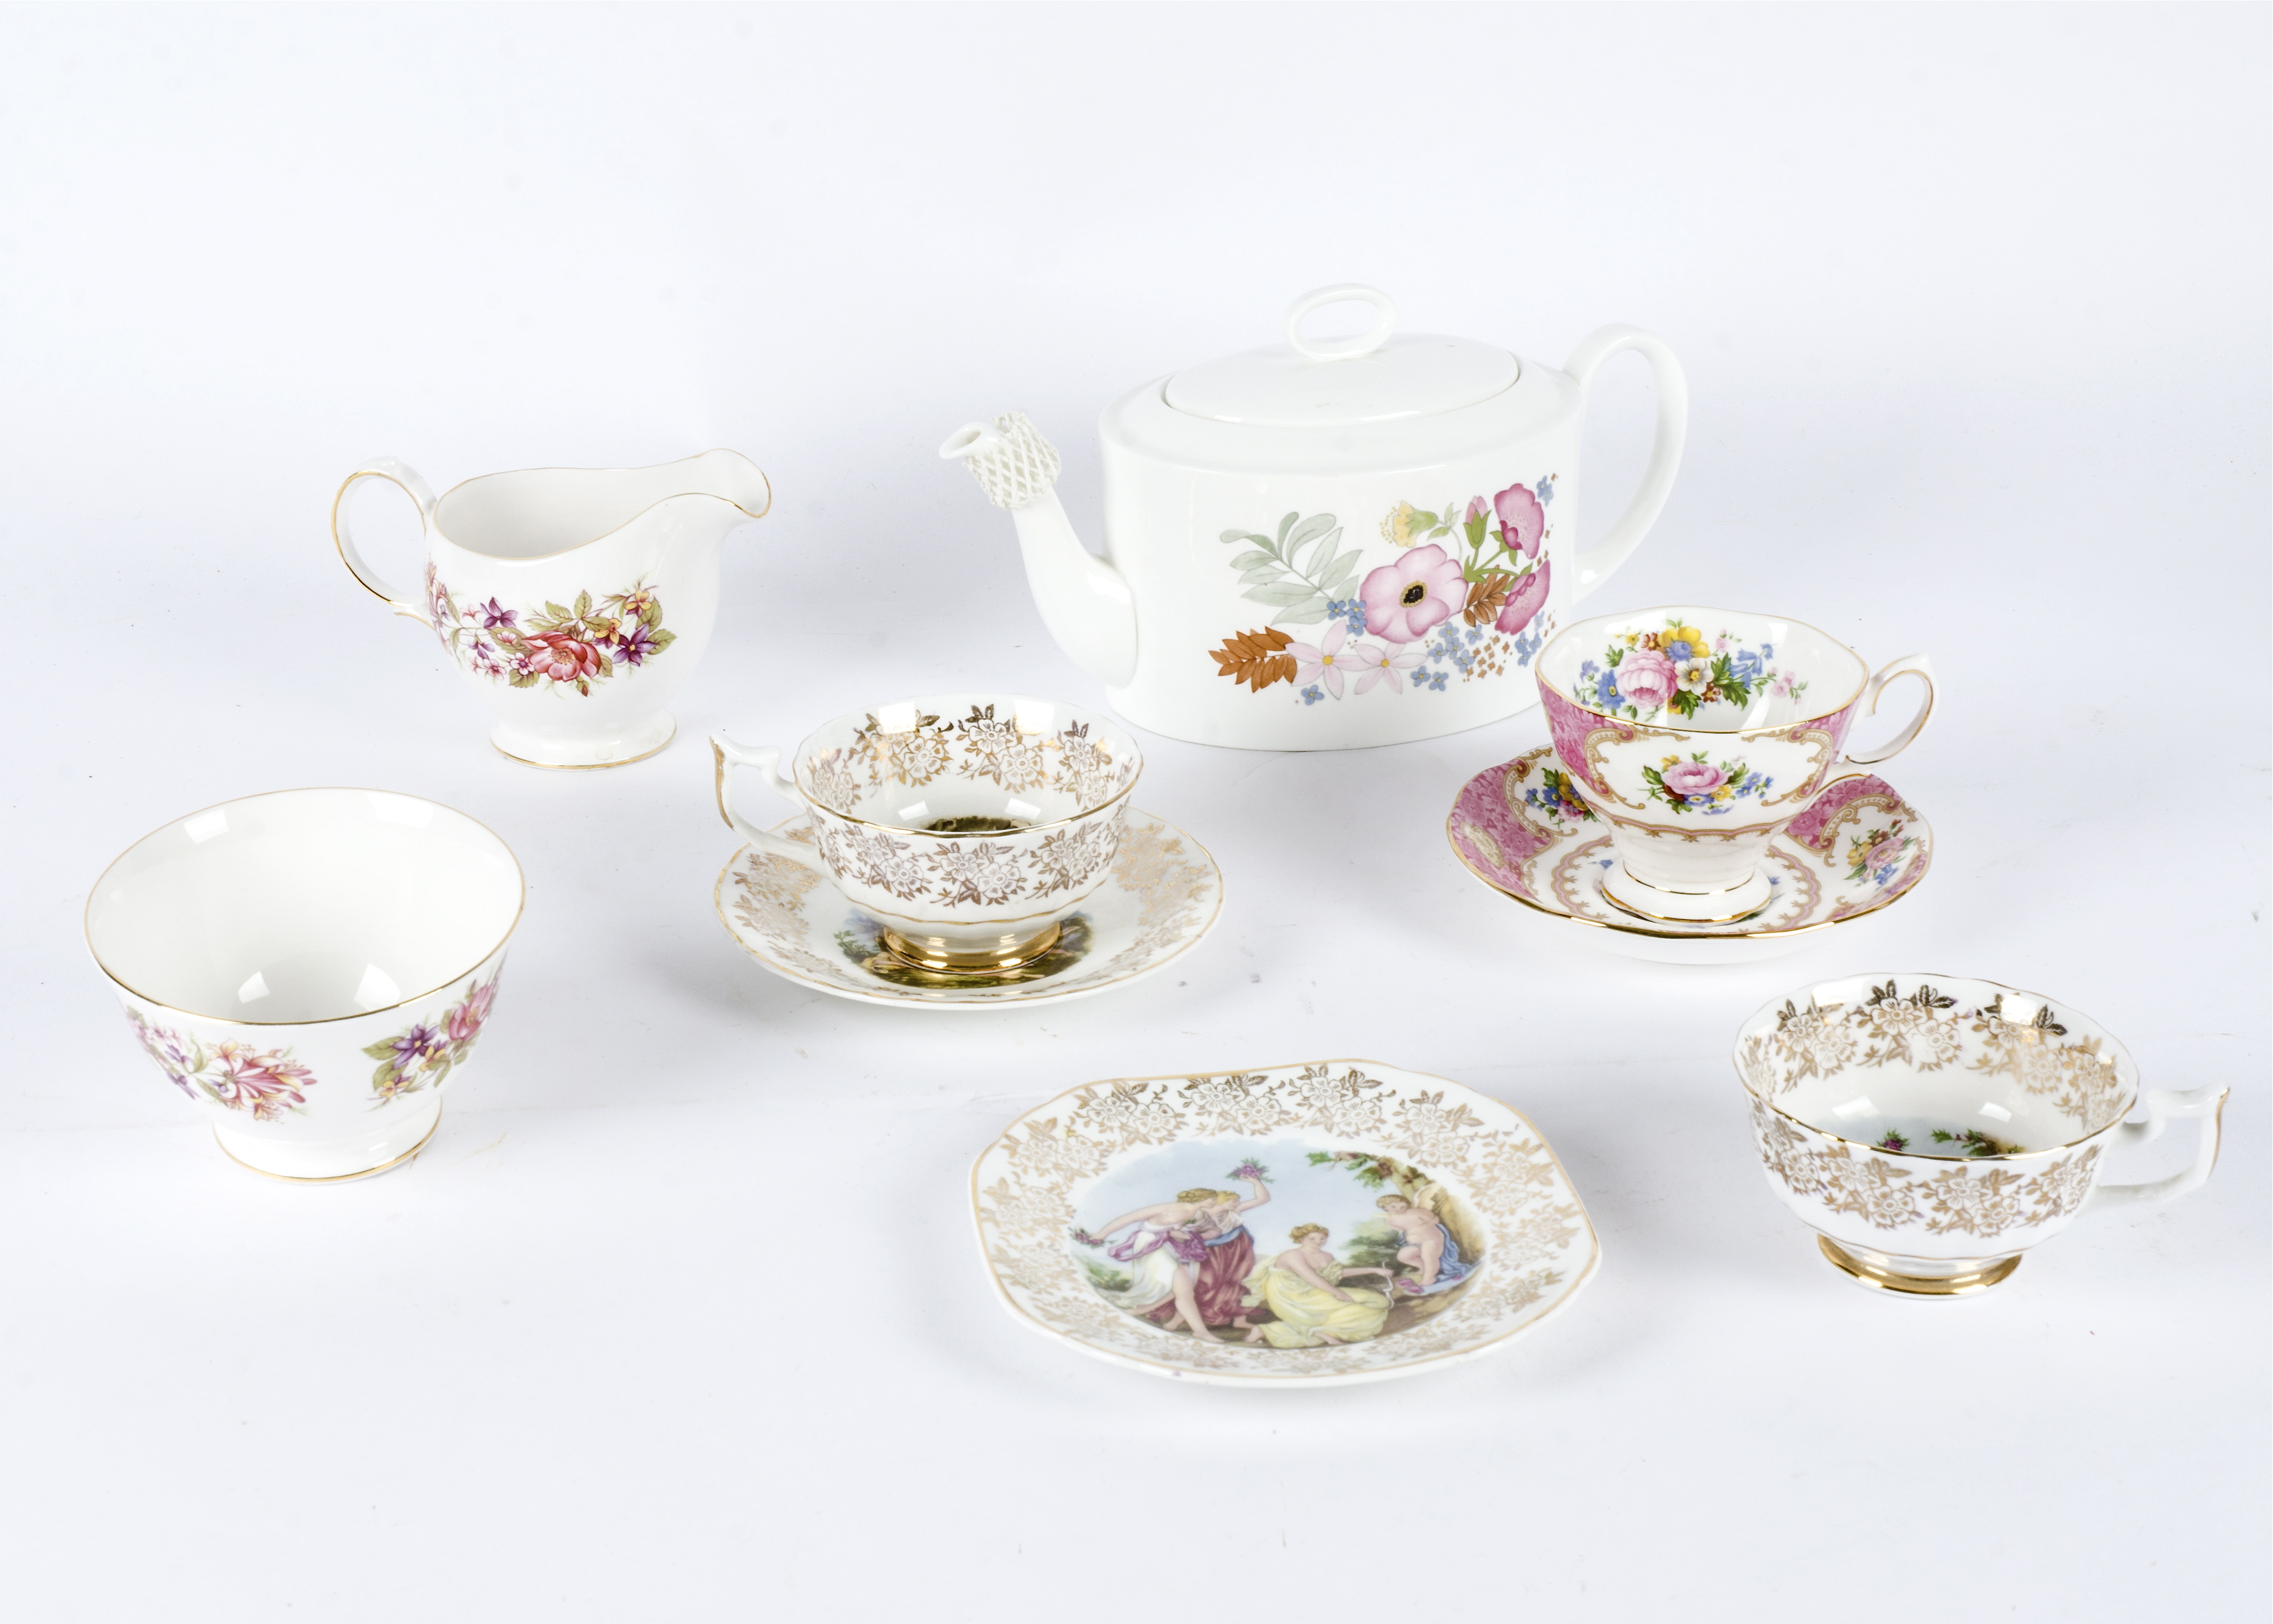 A Royal Albert six place tea service, in the 'Lady Carlyle' pattern, consisting of plates, cups